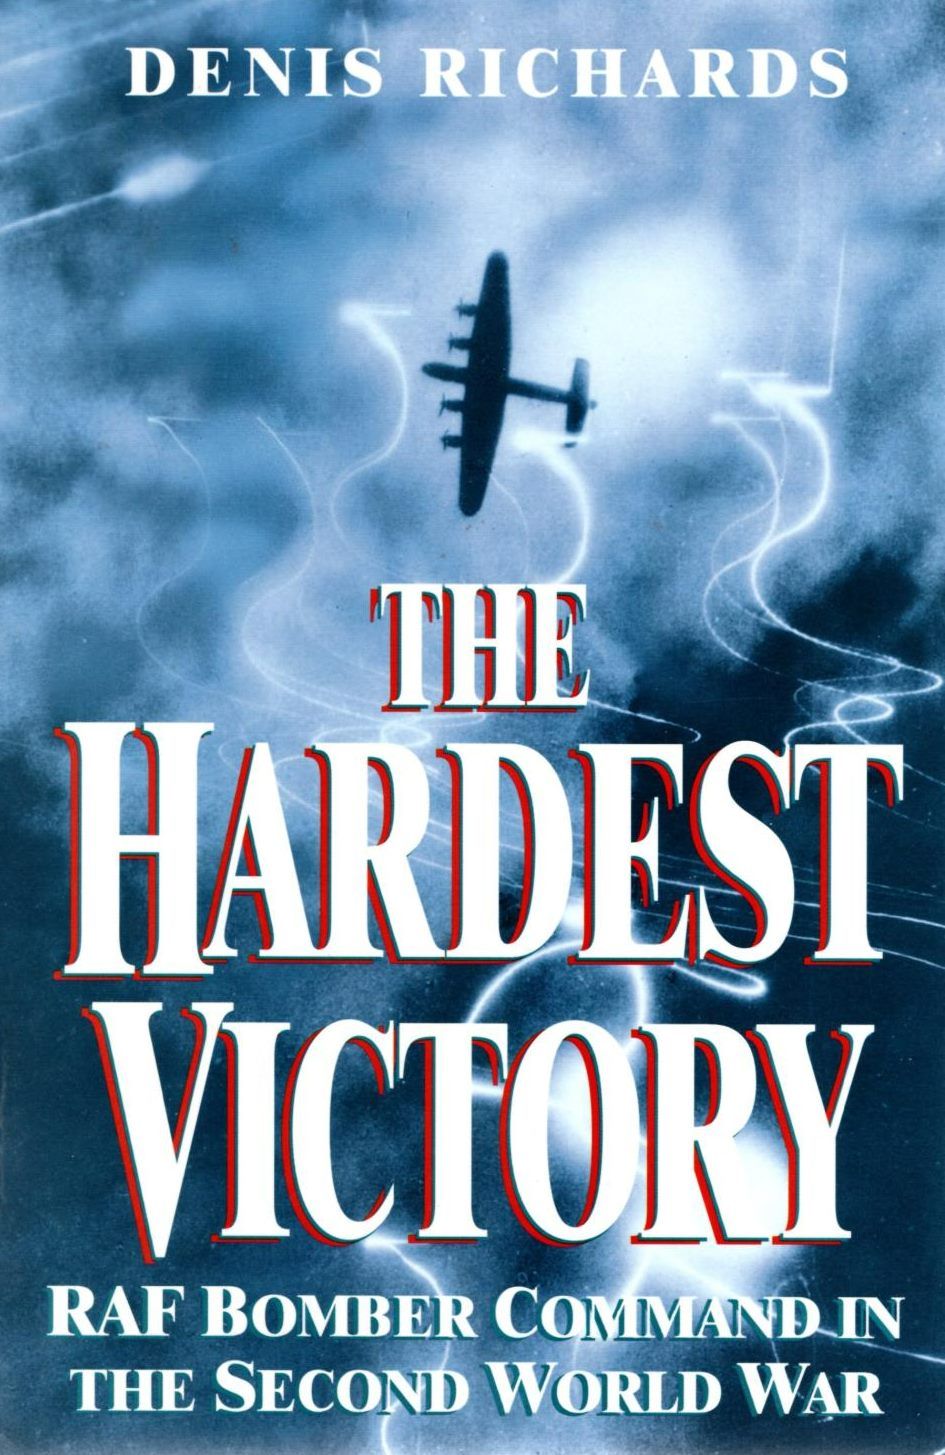 THE HARDEST VICTORY: RAF Bomber Command in the Second World War